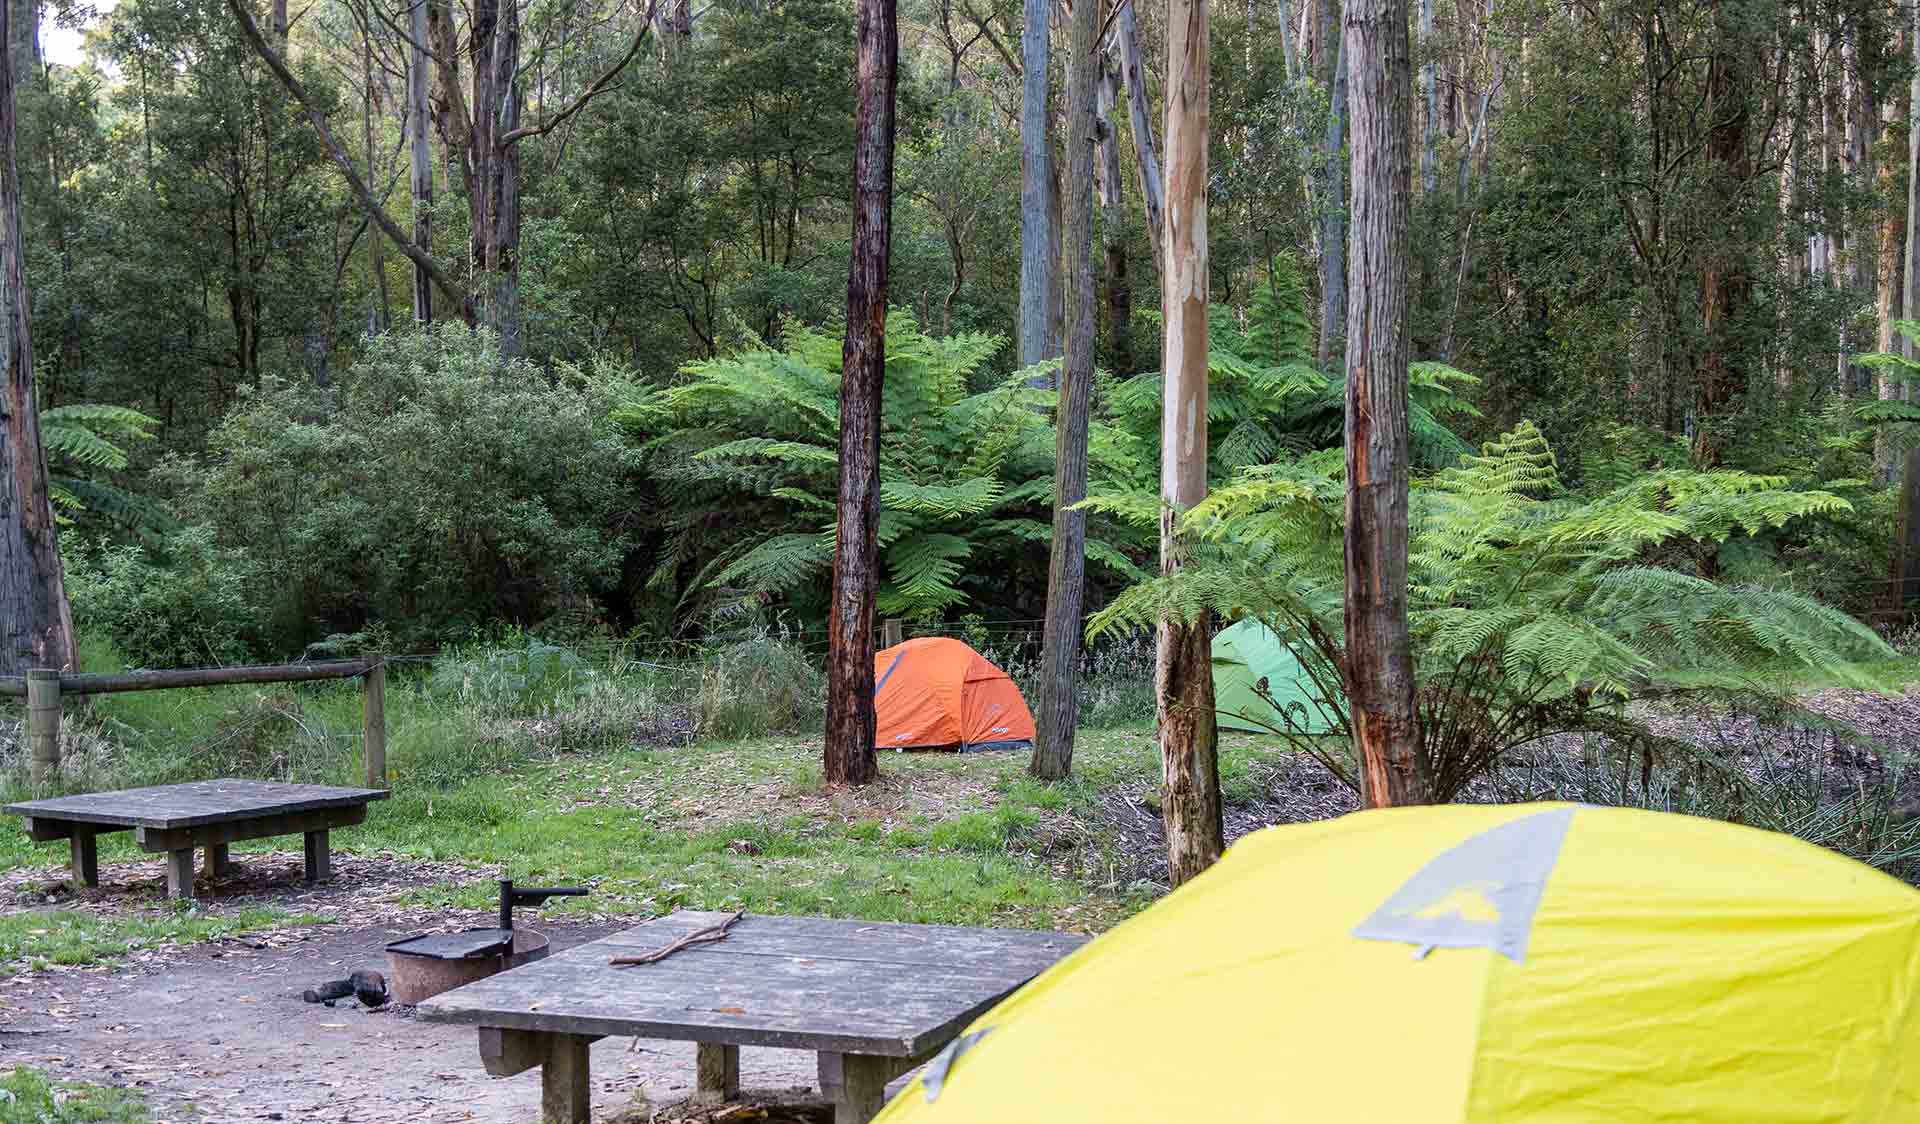 Tents and ferns at Big Hill Campground in the Great Otway National Park